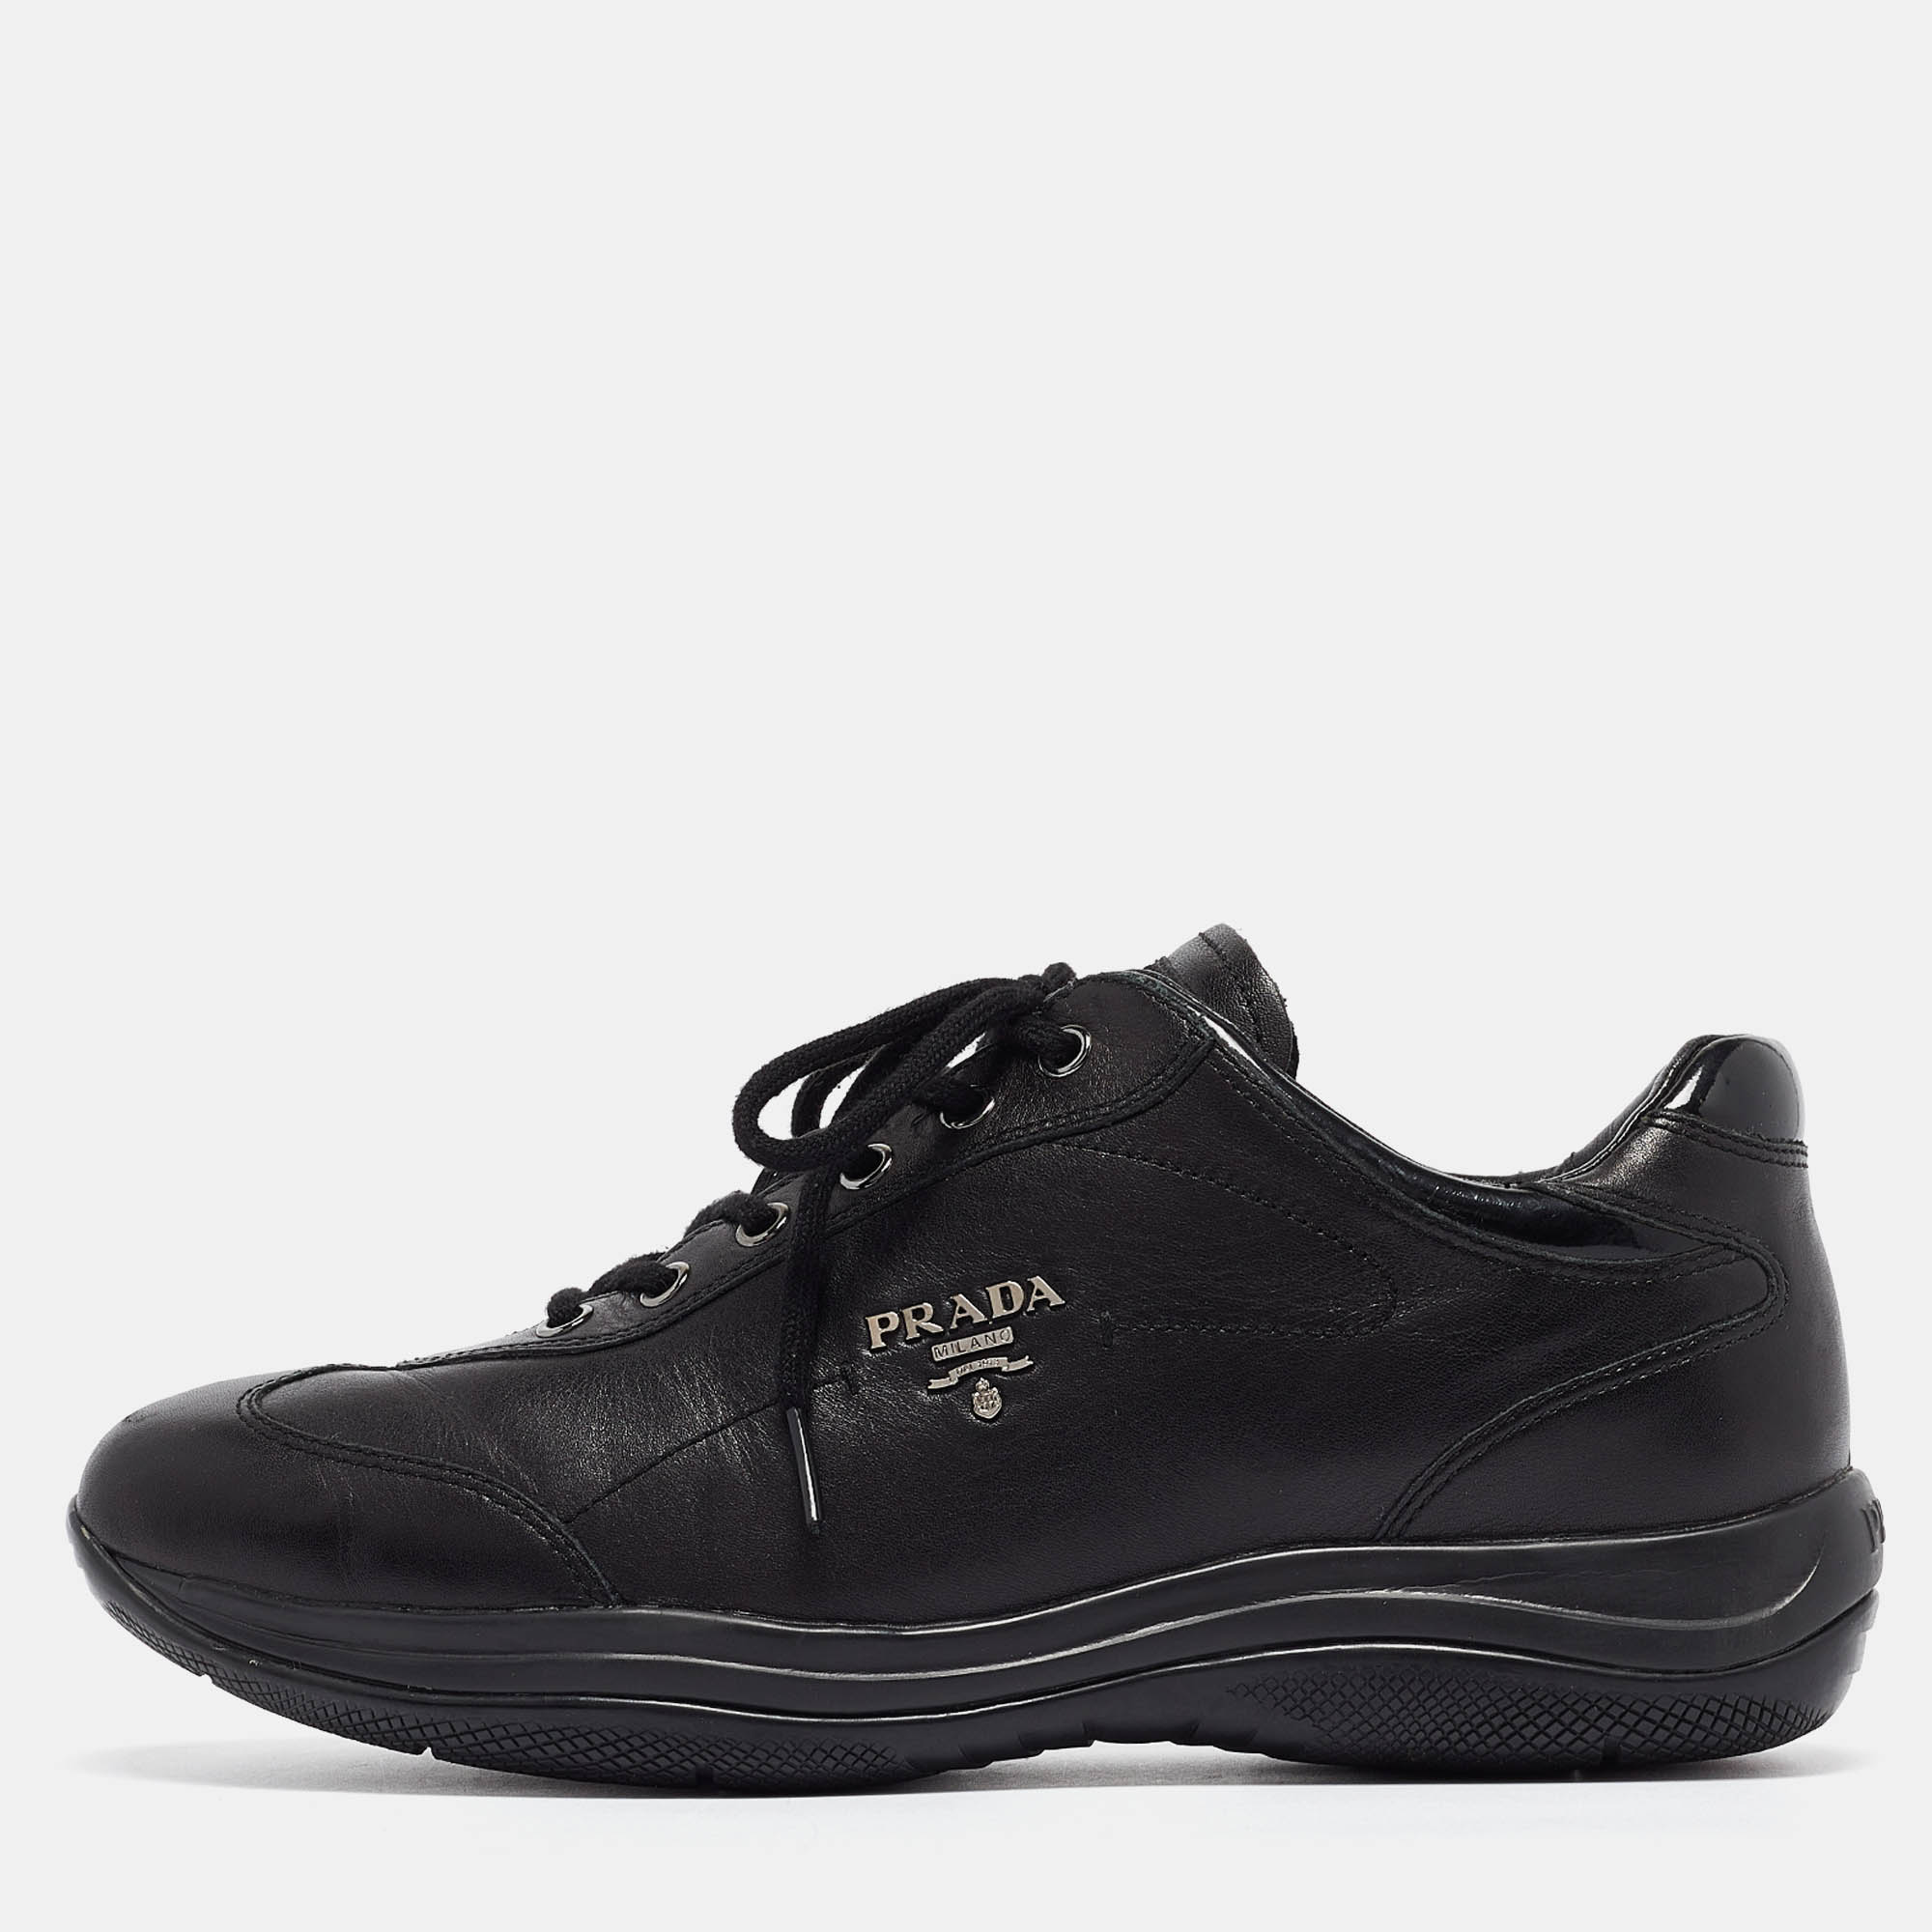 Pre-owned Prada Black Leather Low Top Sneakers Size 39